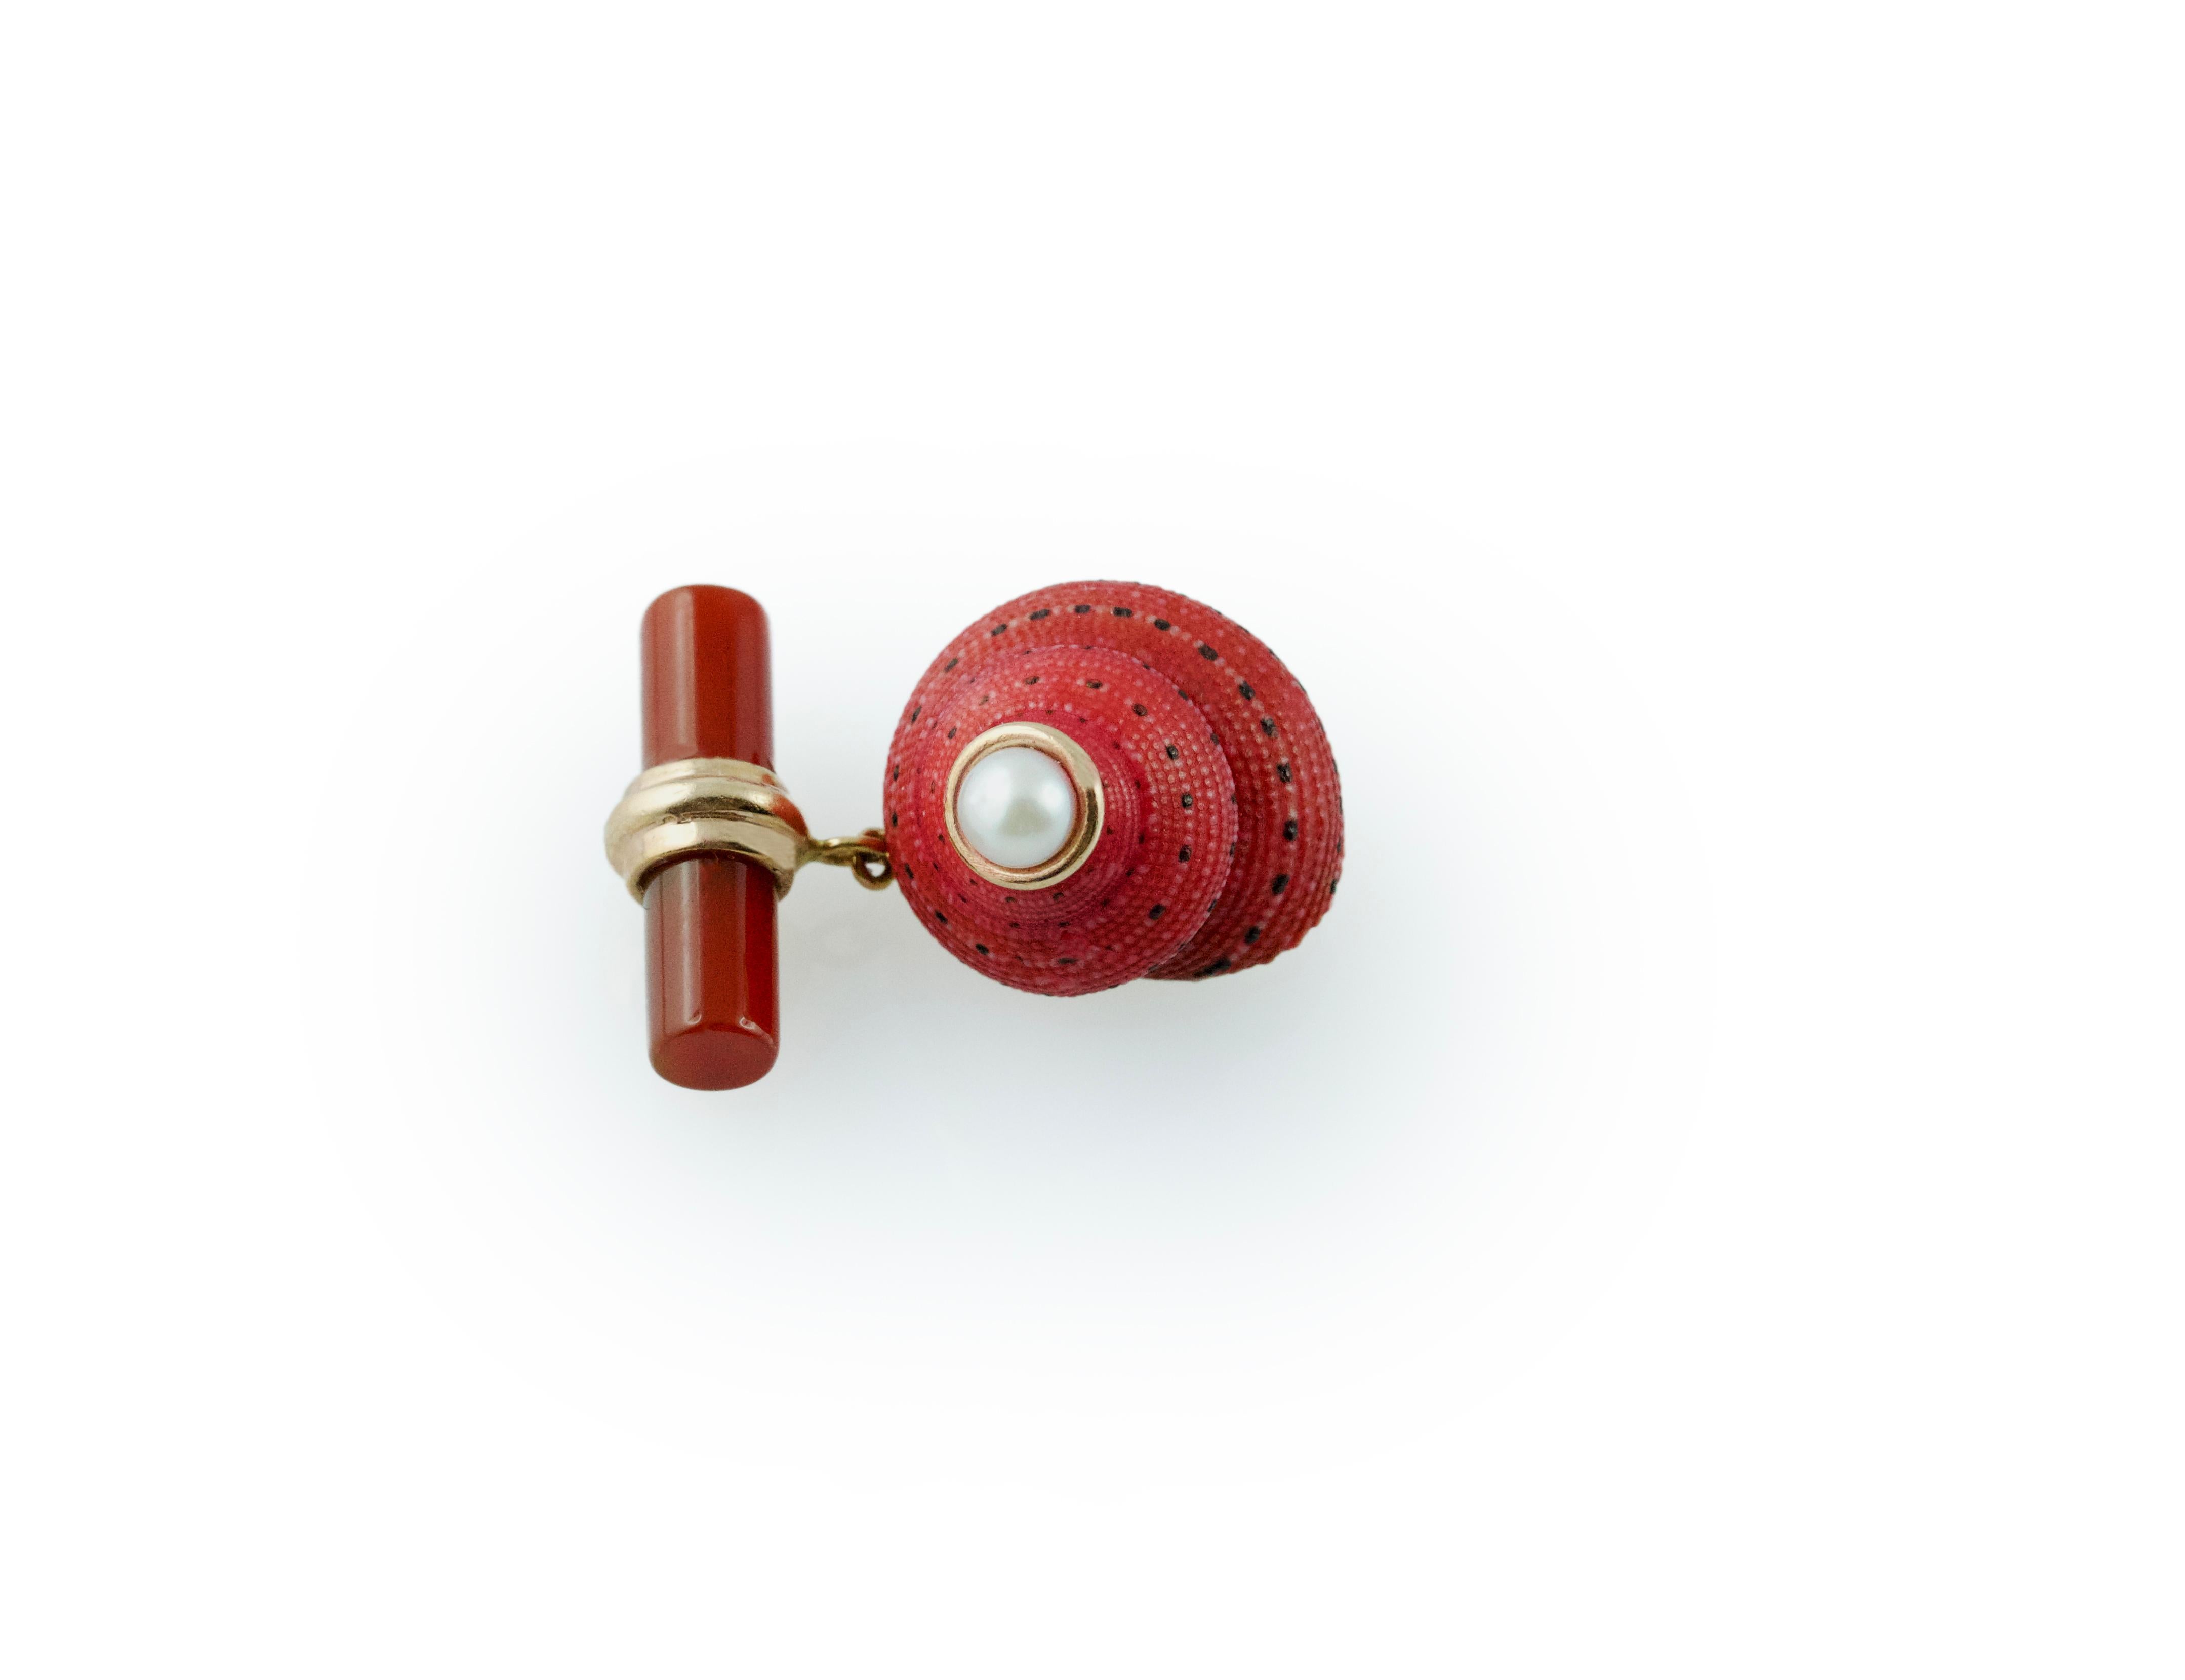 The striking red shade and natural texture of the  shell, adorned with a pearl at the top, is the protagonist of the front face of this elegant pair of cufflinks, which also features a cylindrical toggle in carnelian stone, whose red matches the one